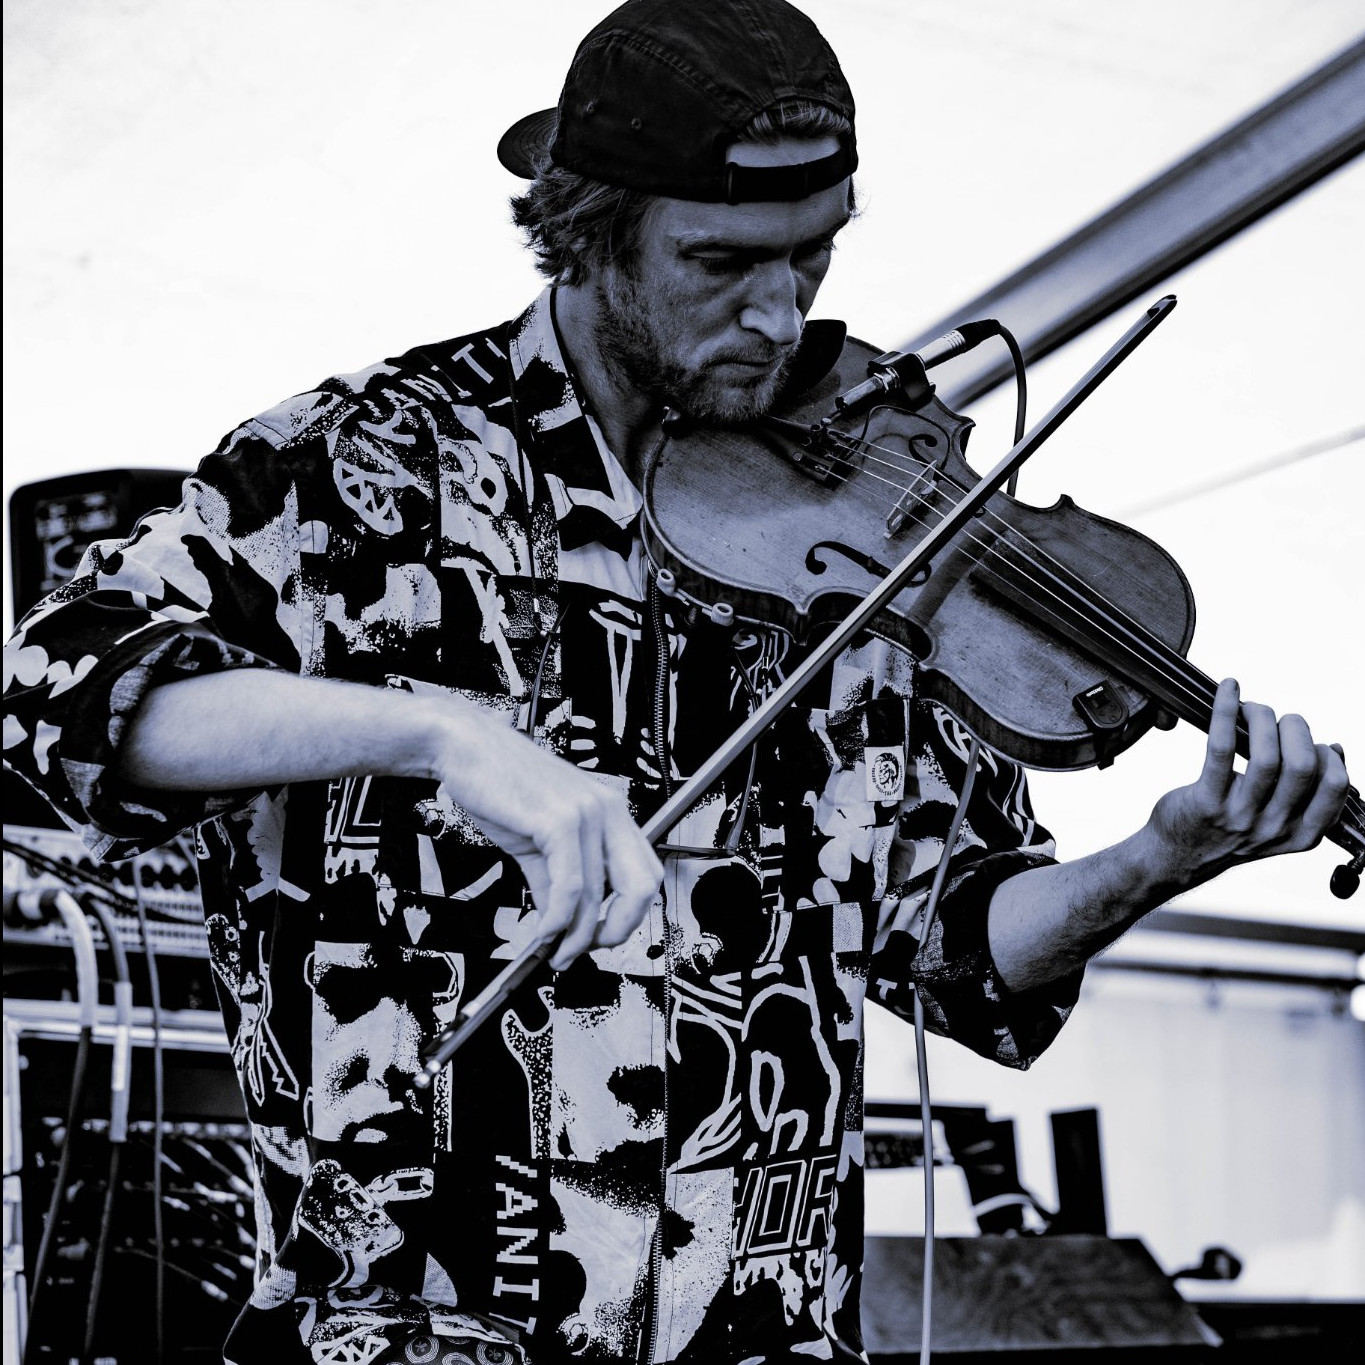 Pete Davies, Fiddle player with The Freedom Fields Ceilidh Band